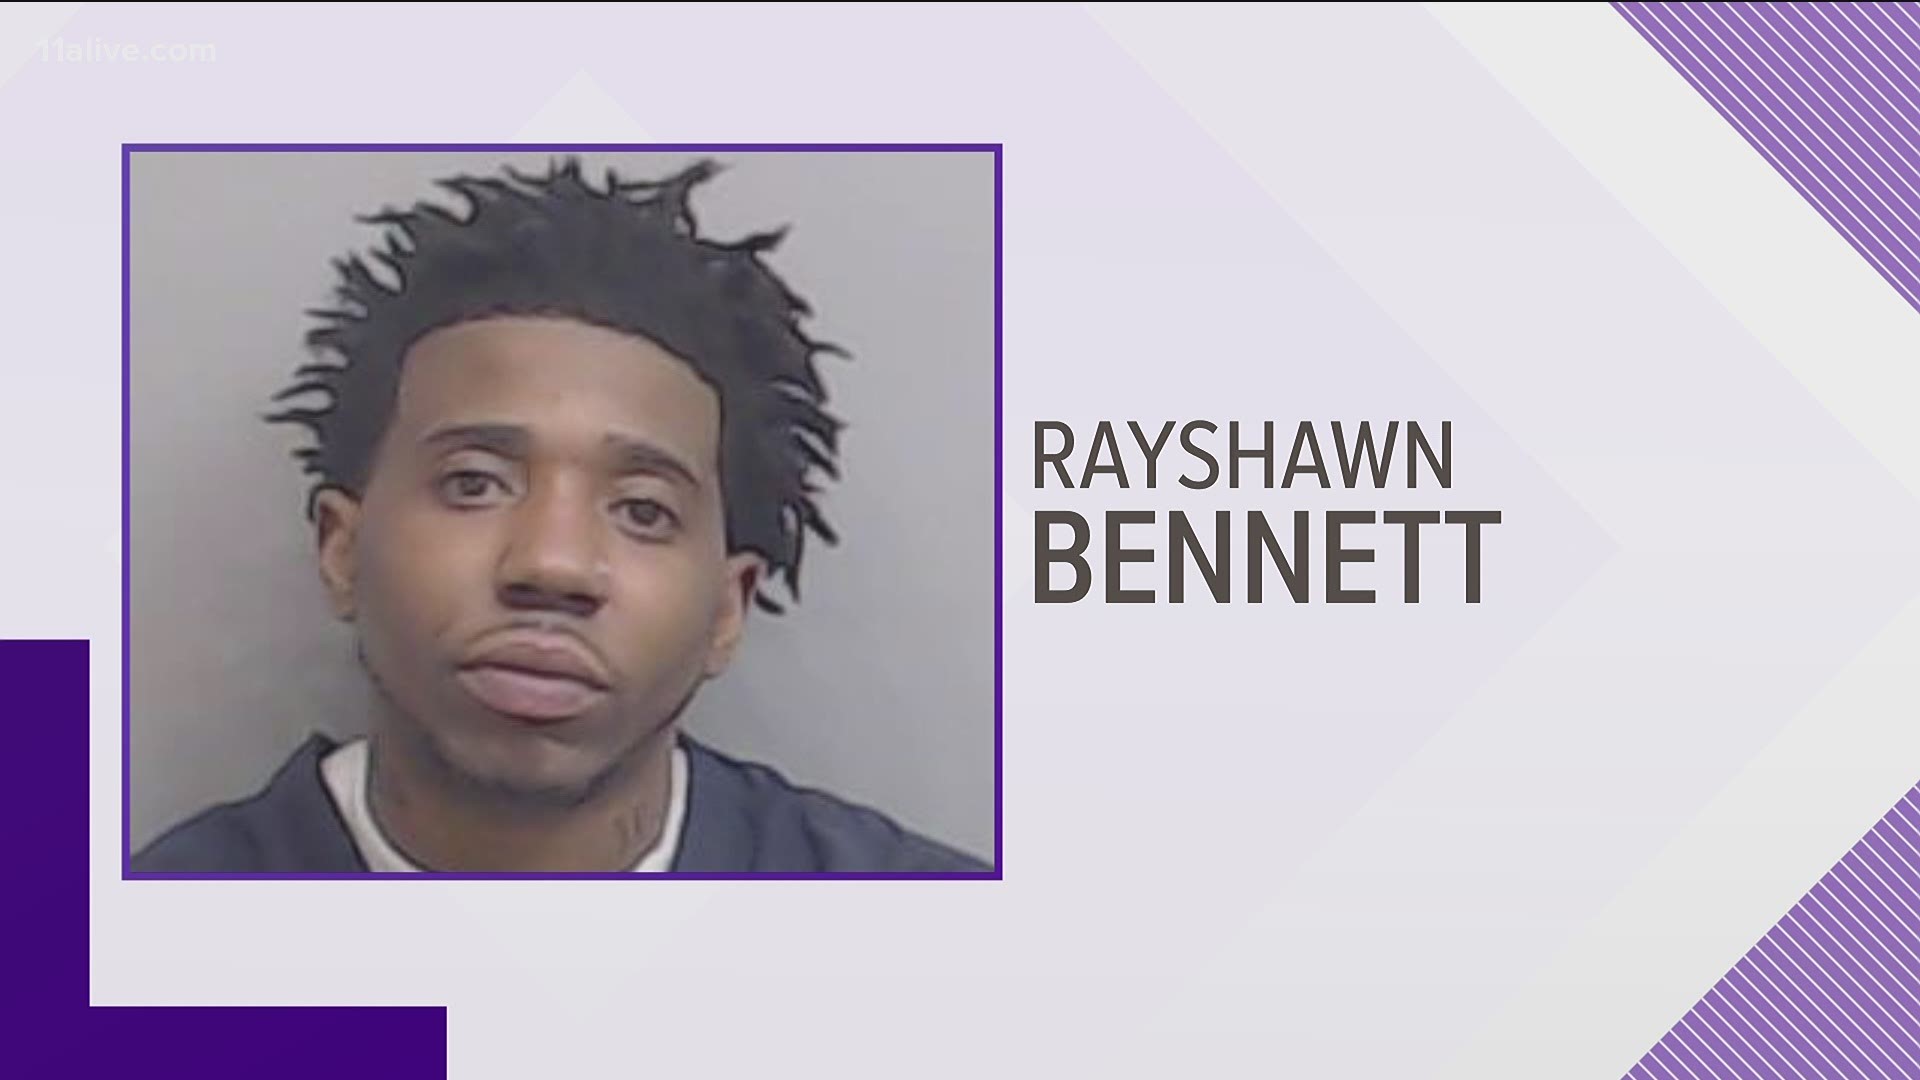 The rapper, charged with the December murder of a 28-year-old man, posted bond and is now wearing an ankle monitor.